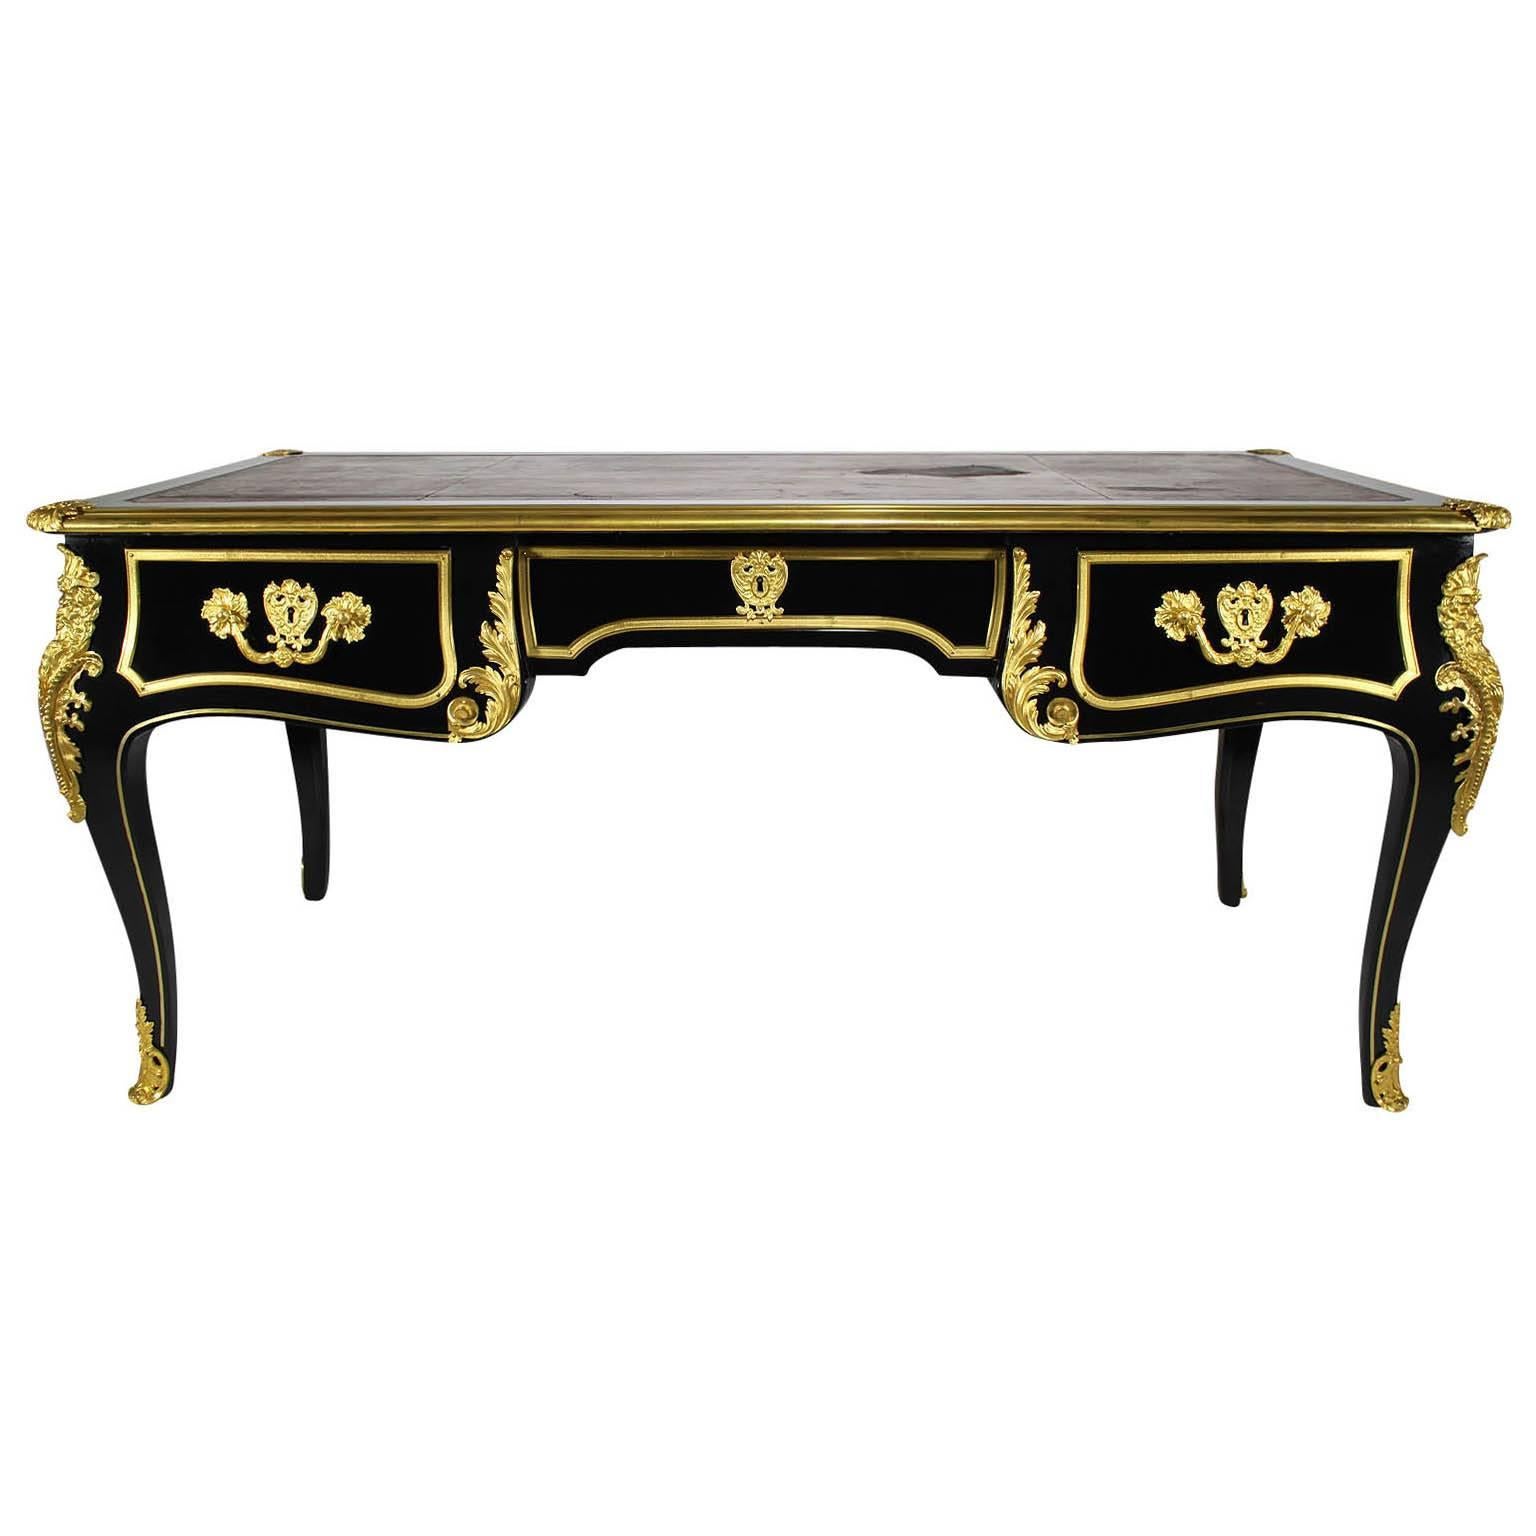 A fine French 19th century Louis XV style ebonized wood and gilt bronze-mounted figural bureau plat (desk) with three drawers and leather top. The shaped rectangular top enclosing a gilt tooled leather writing surface (worn) within a molded border